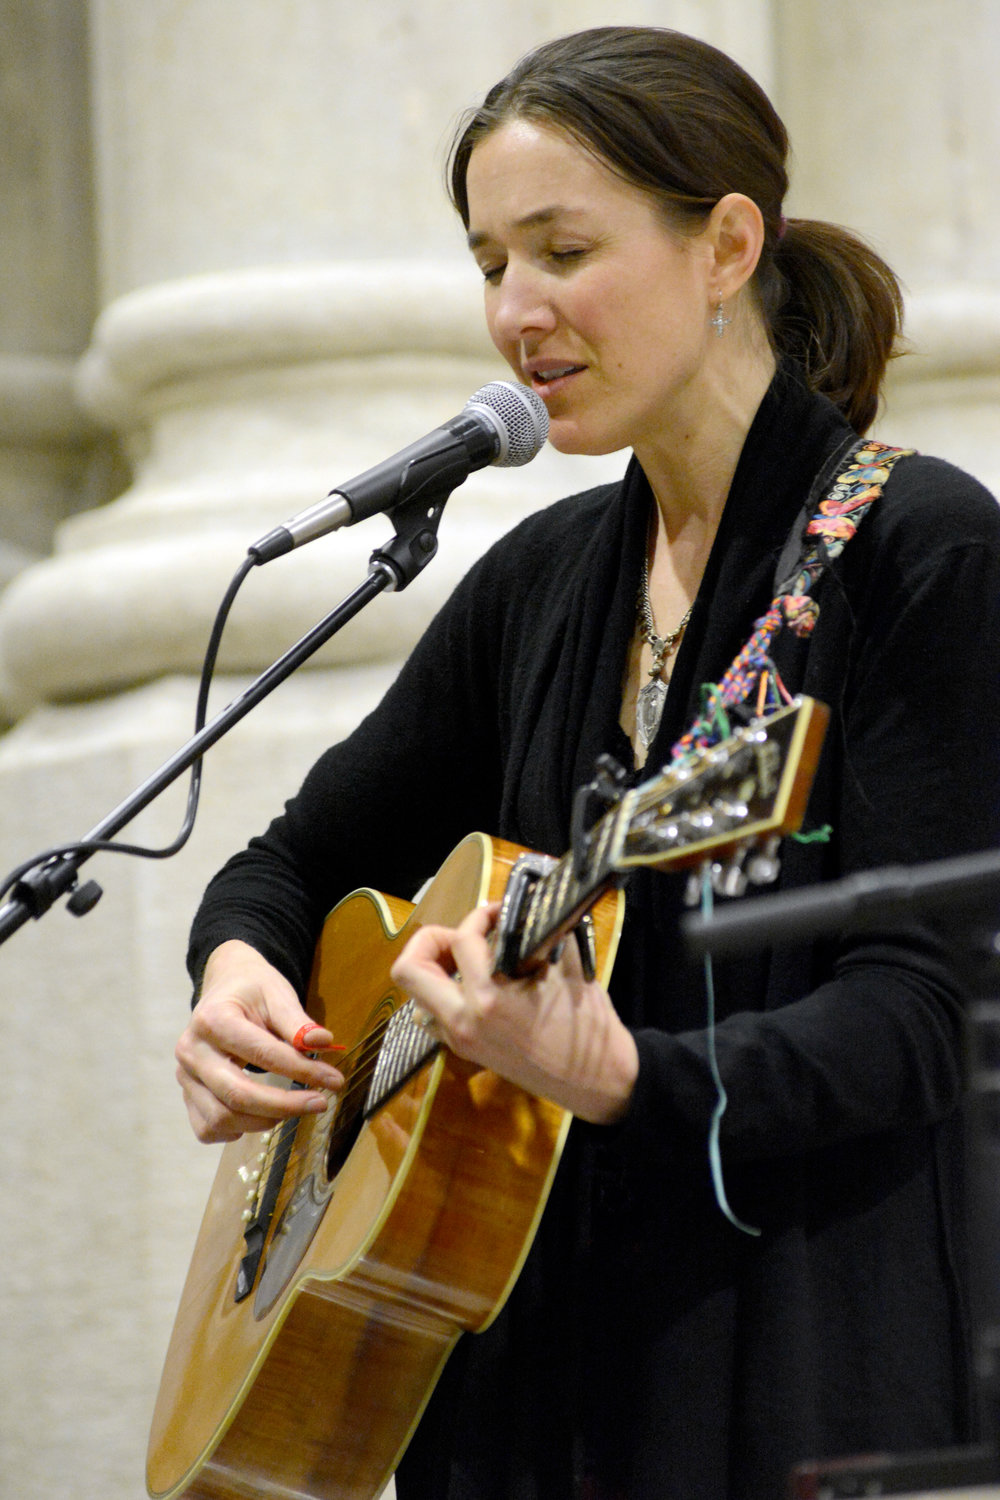 Danielle Rose sings before the March 4 Mass, which was sponsored by the archdiocesan Office of Young Adult Outreach.